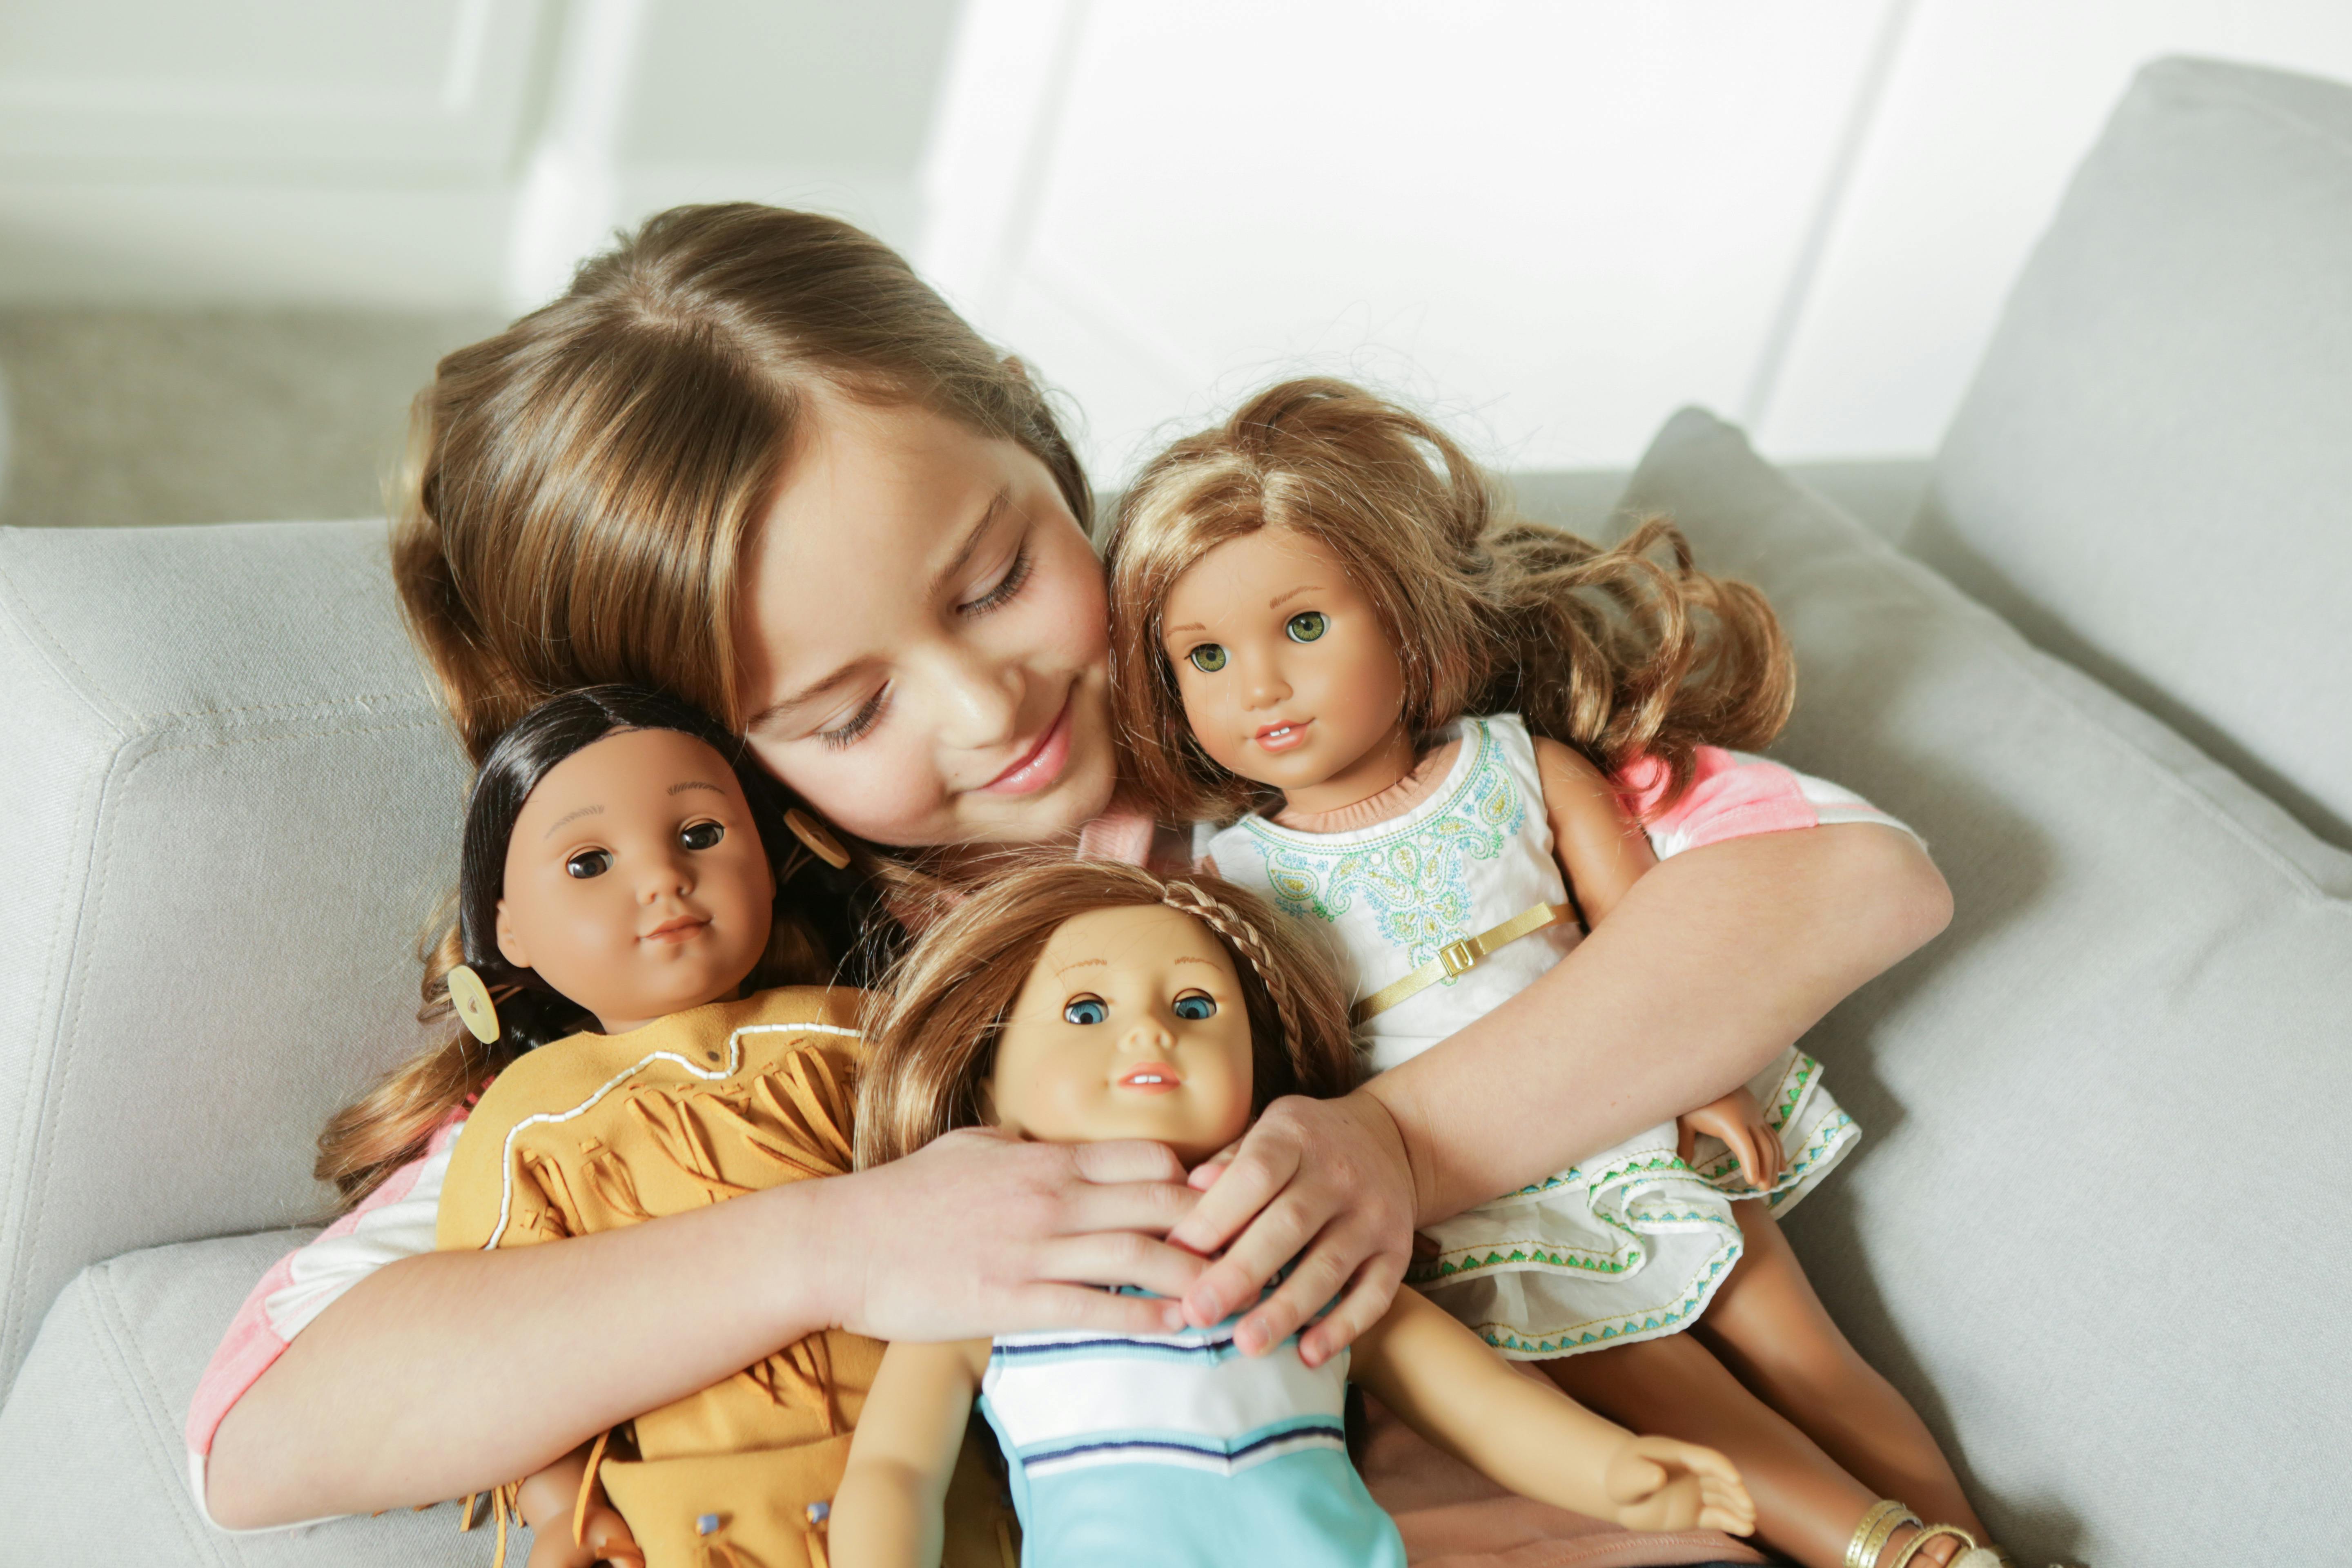 American Girl Dolls Are Making a Comeback, Thanks to These Memes